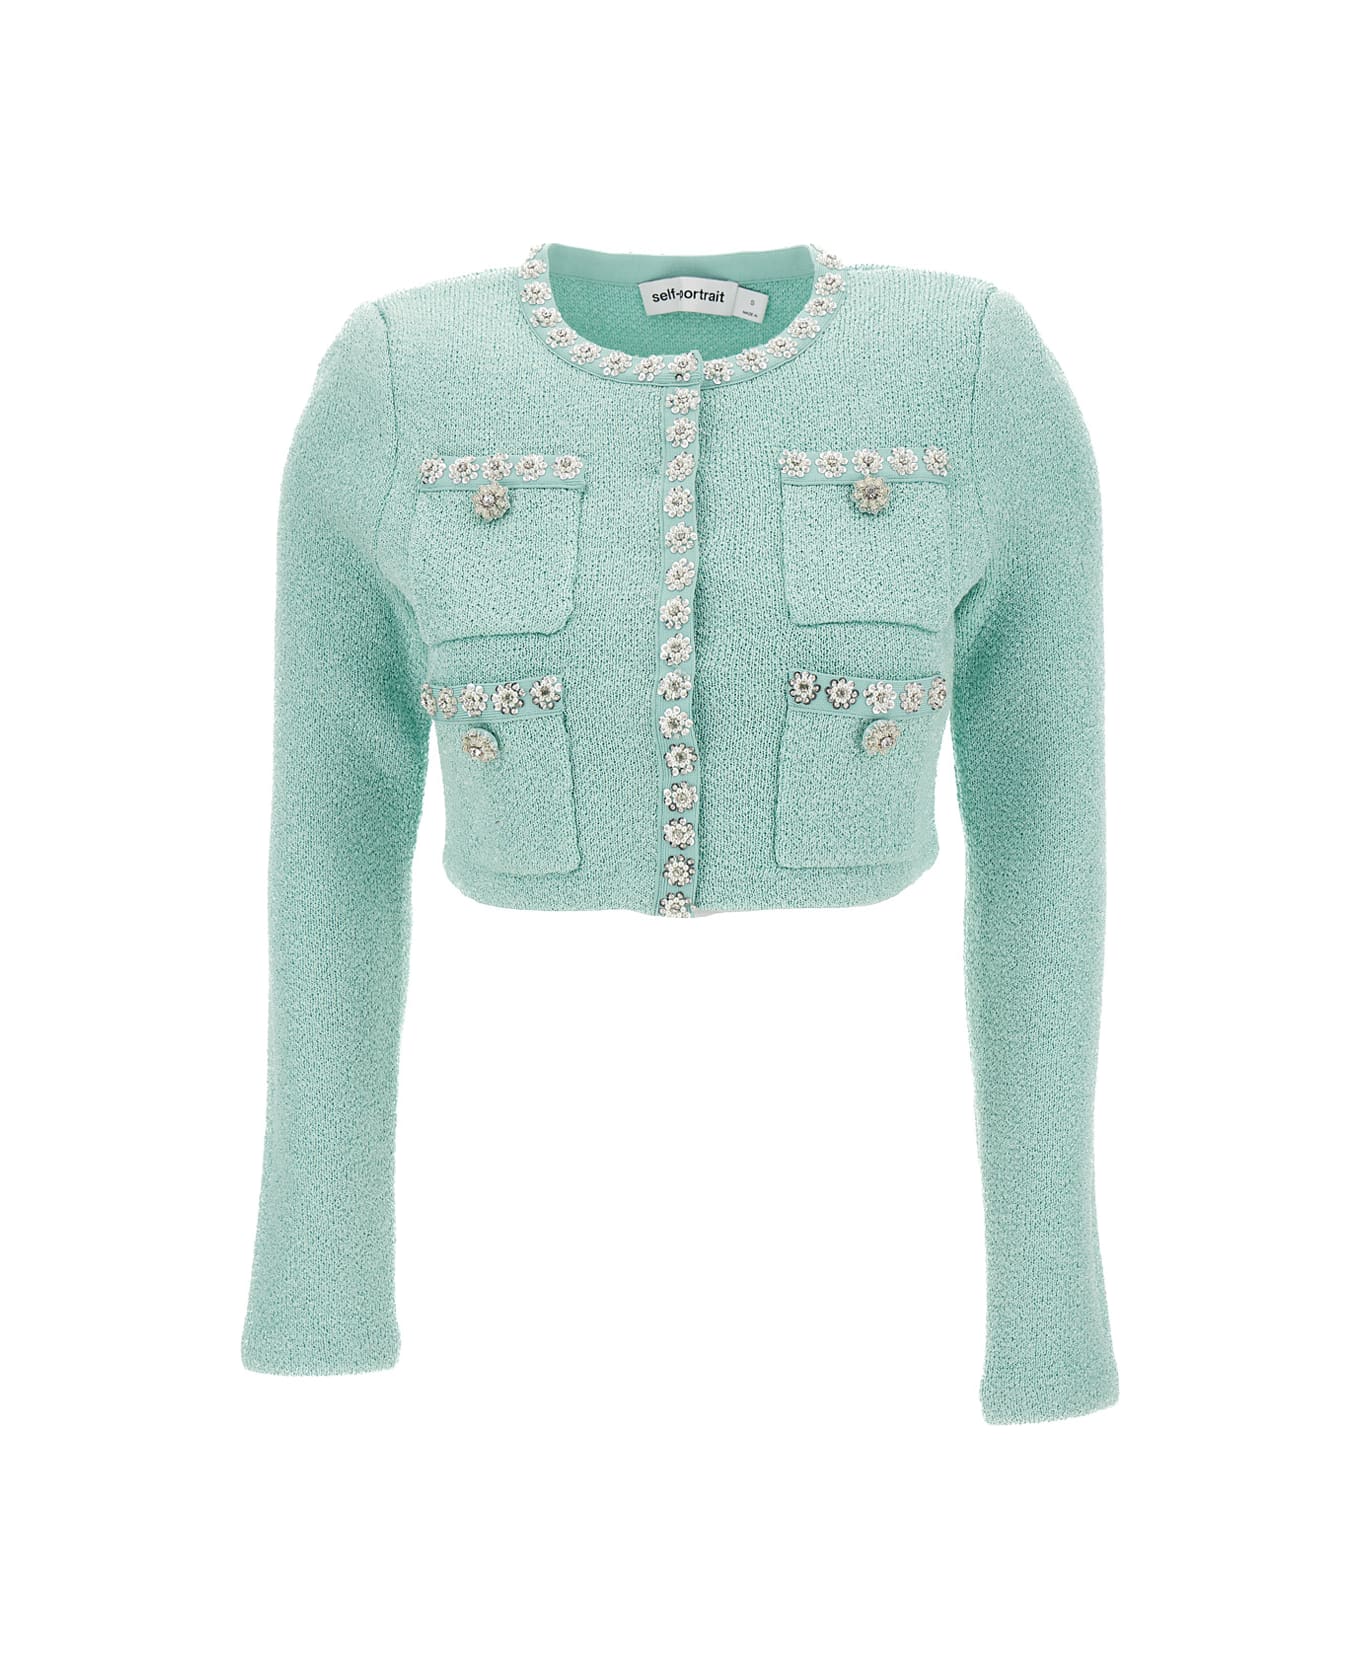 self-portrait Light Blue Crop Jacket With Jewel Buttons In Knit Woman - Light blue カーディガン